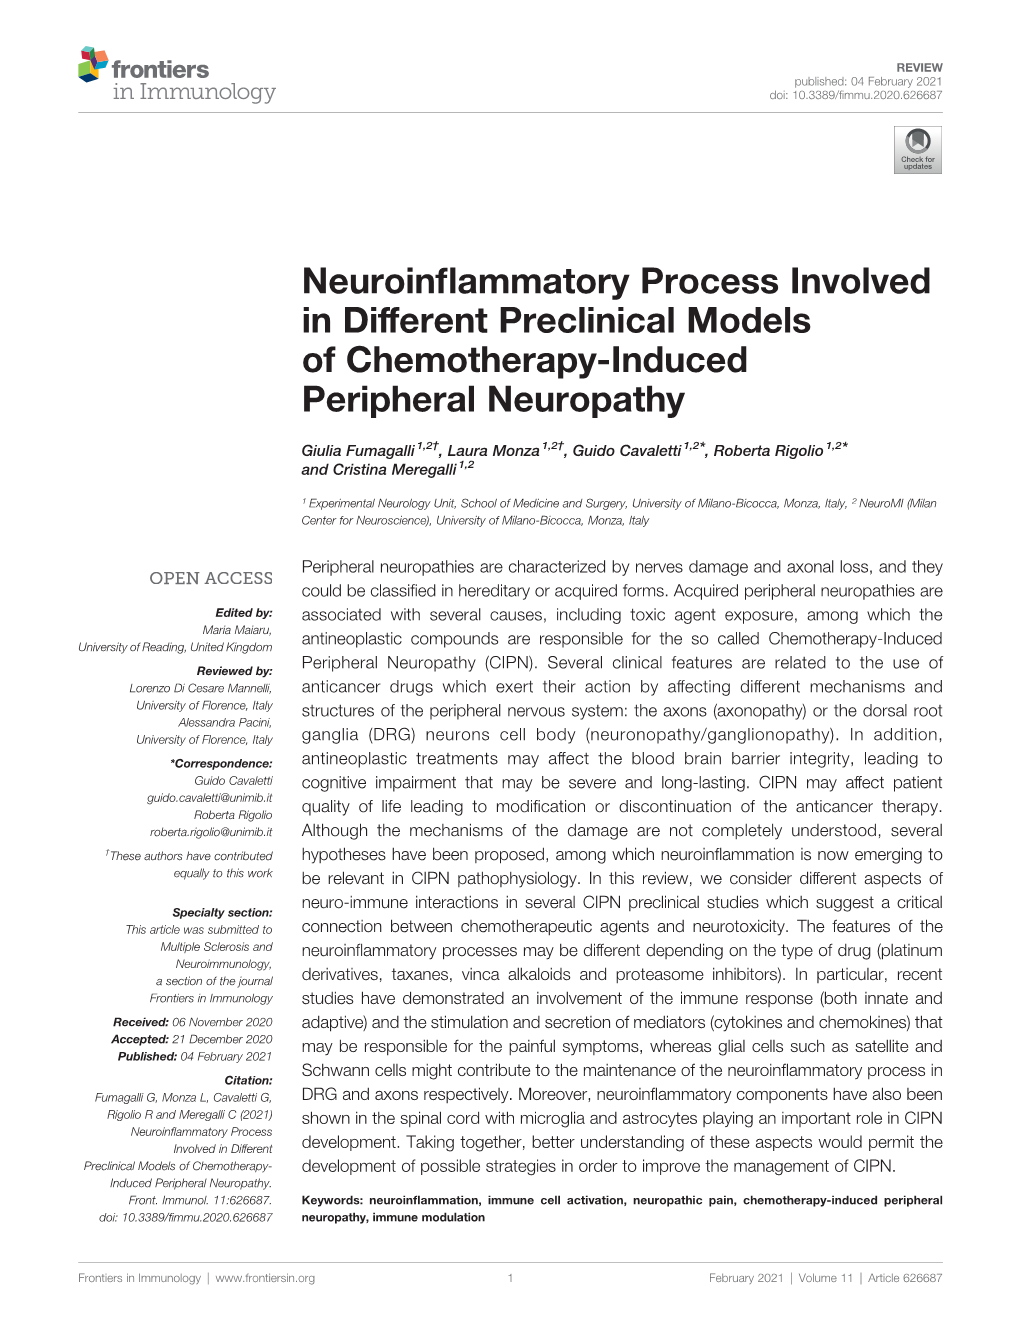 Neuroinflammatory Process Involved in Different Preclinical Models Of